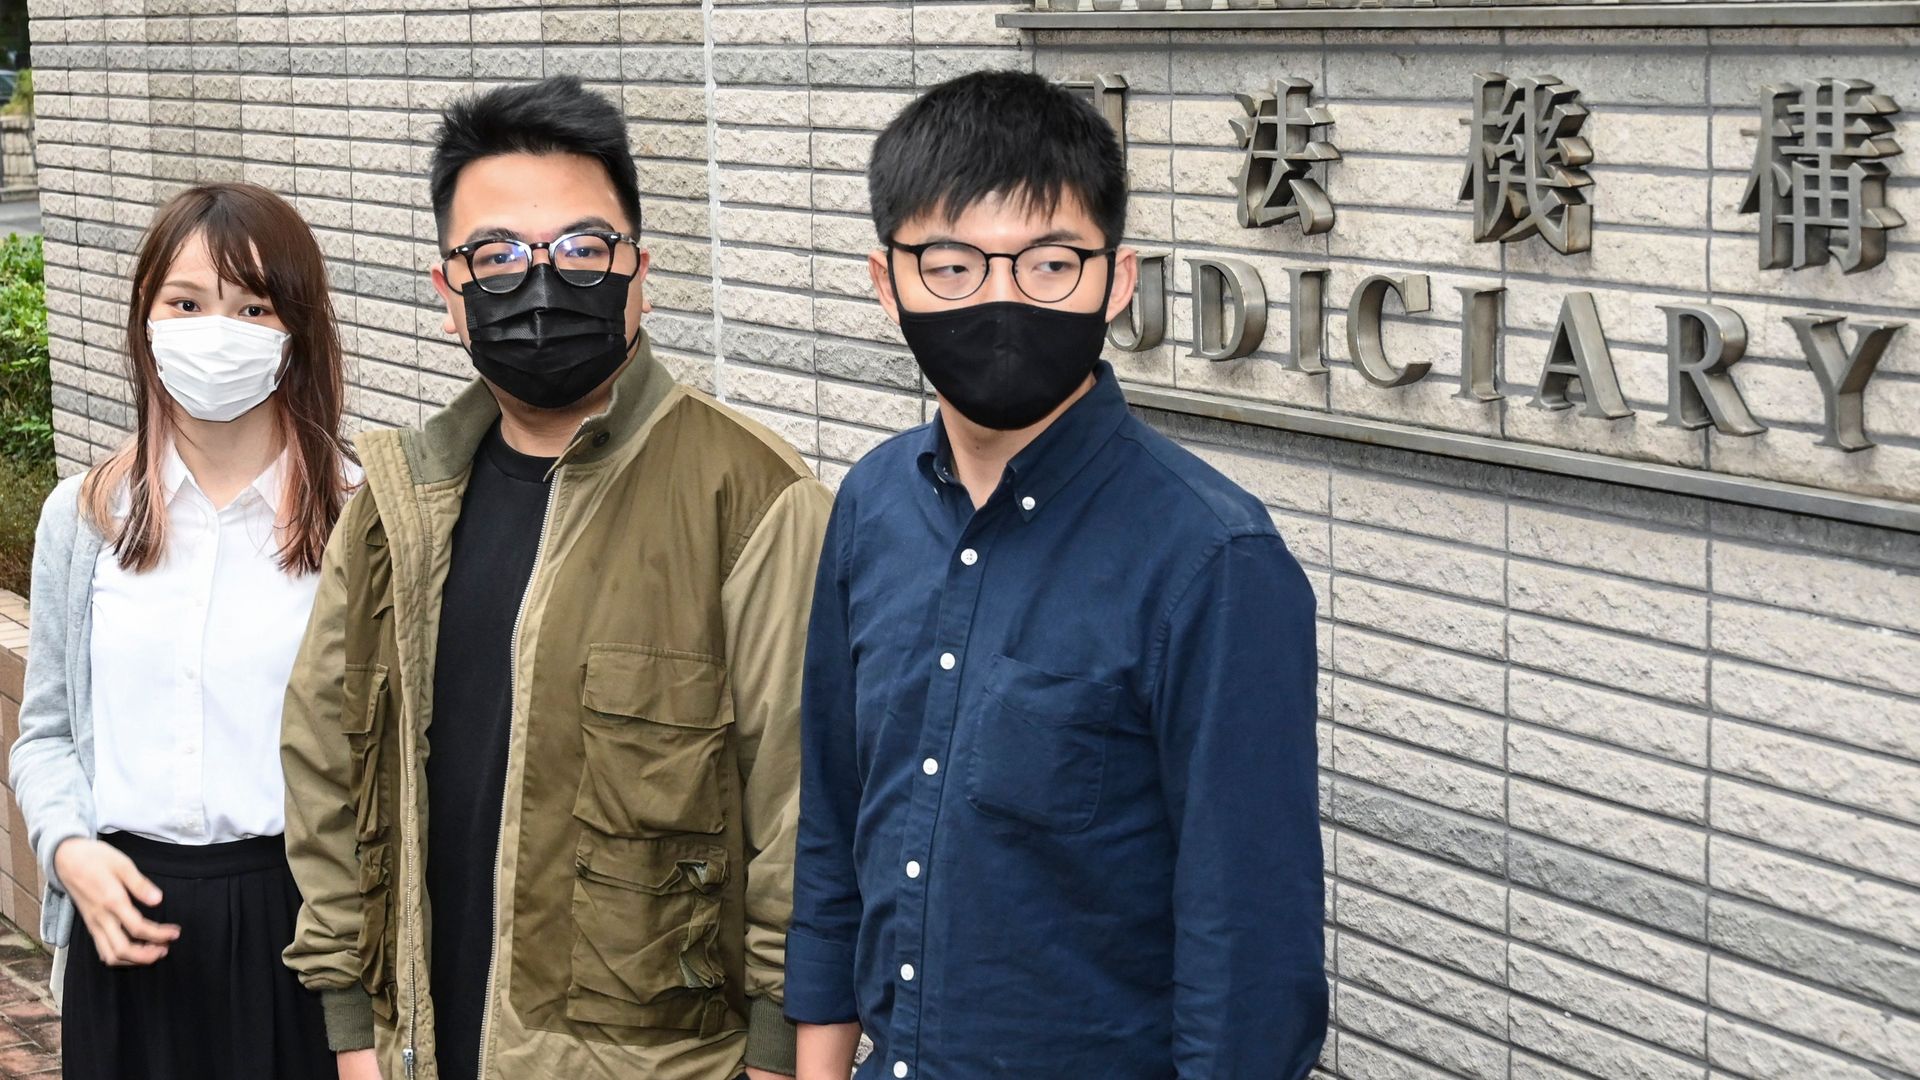  Pro-democracy activists (L-R) Agnes Chow, Ivan Lam and Joshua Wong arrive for their trial at West Kowloon Magistrates Court in Hong Kong on November 23